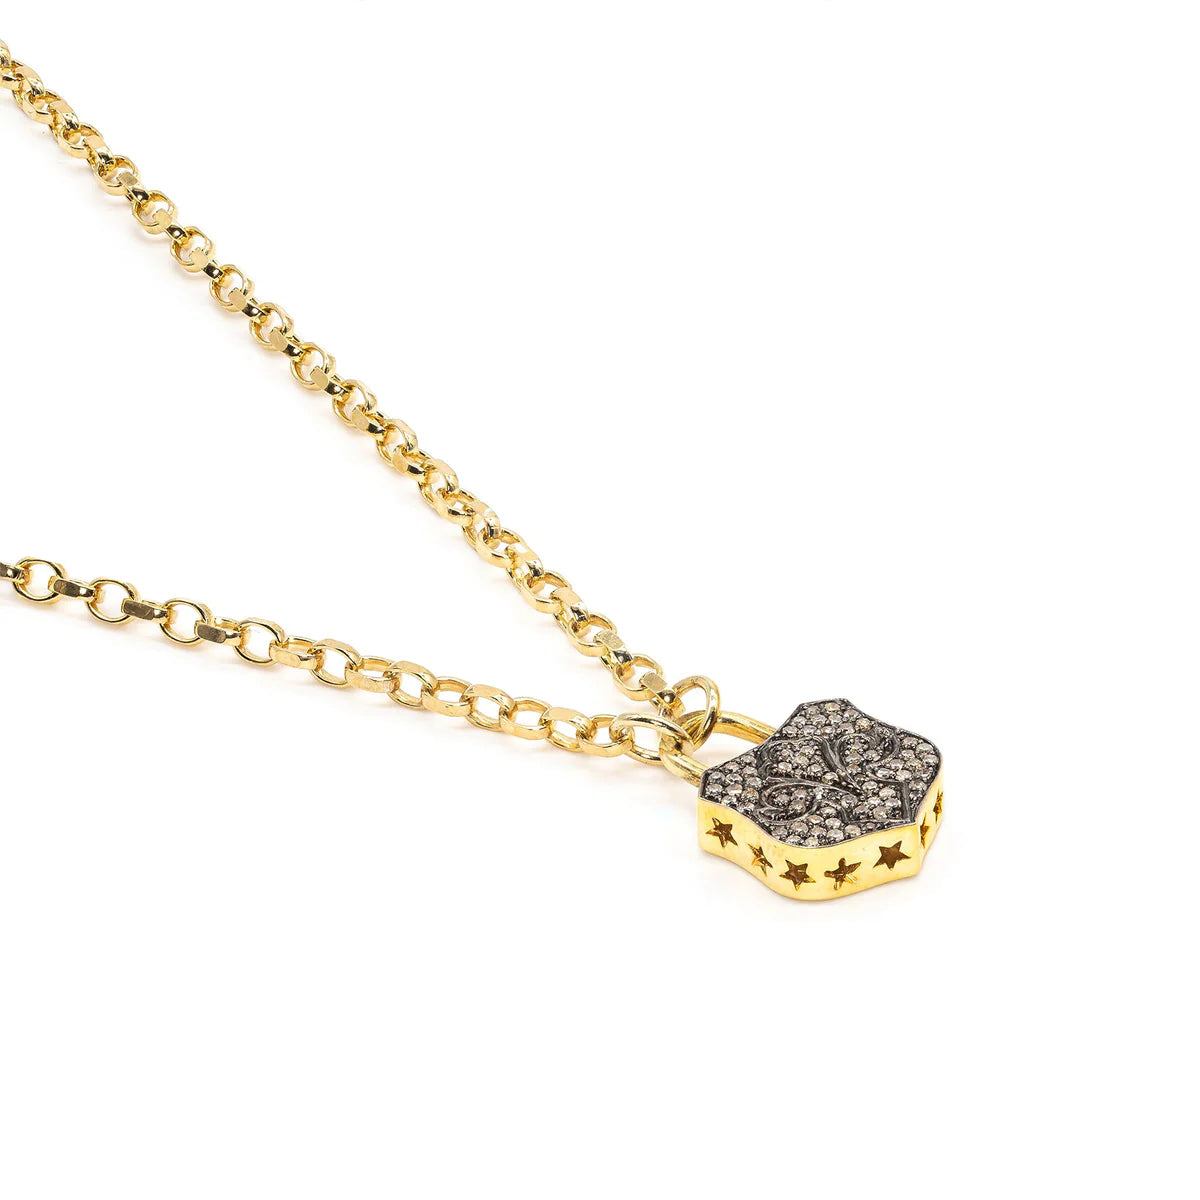 Gold and diamond chunky lock necklace on gold belcher chain